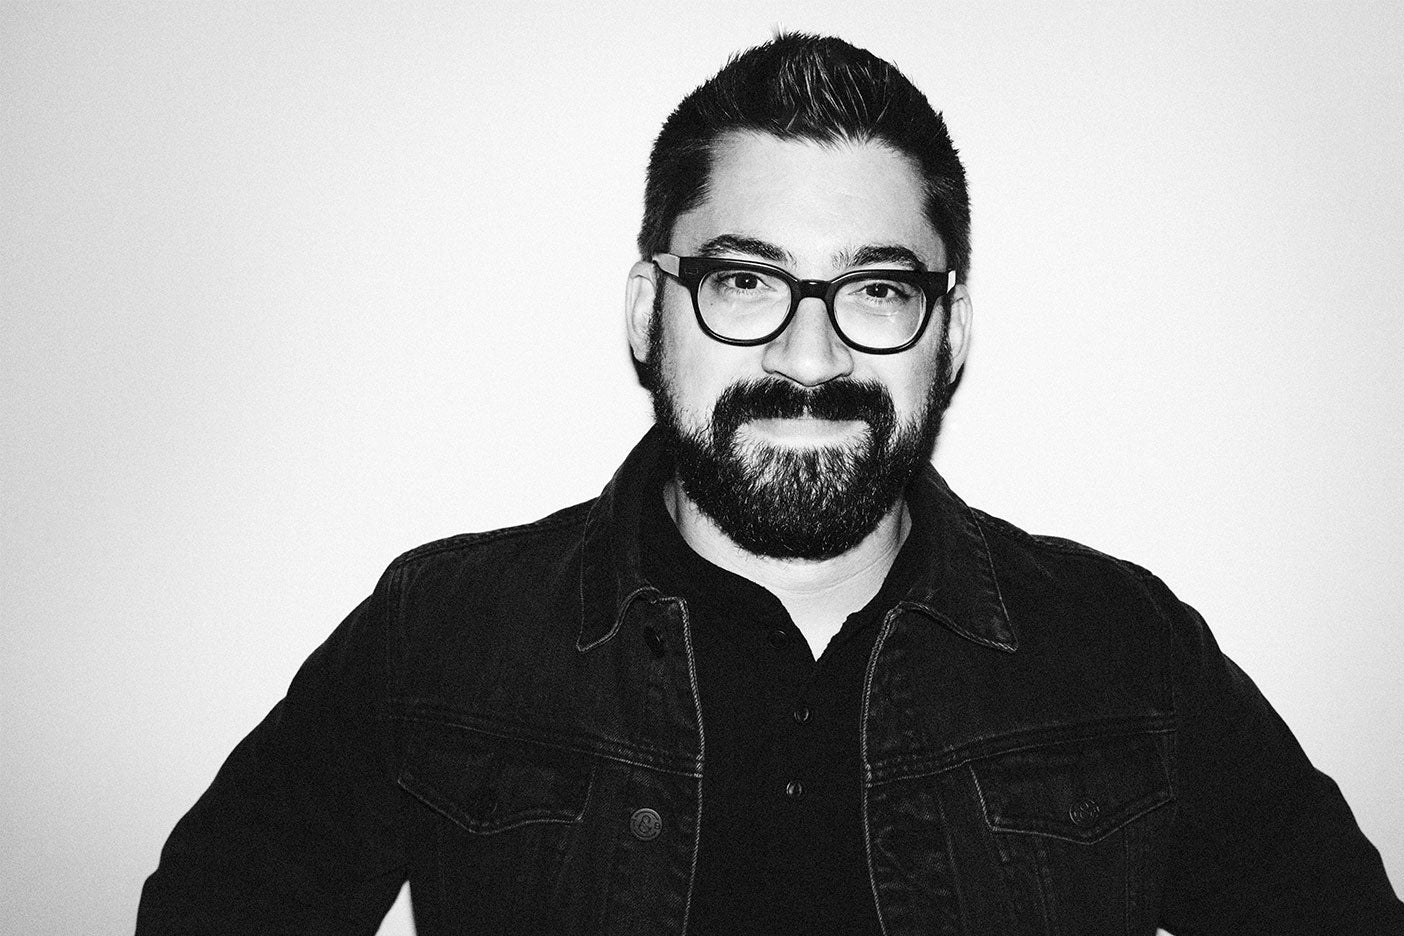 Steal Like an Artist author Austin Kleon on how to be creative and make art.